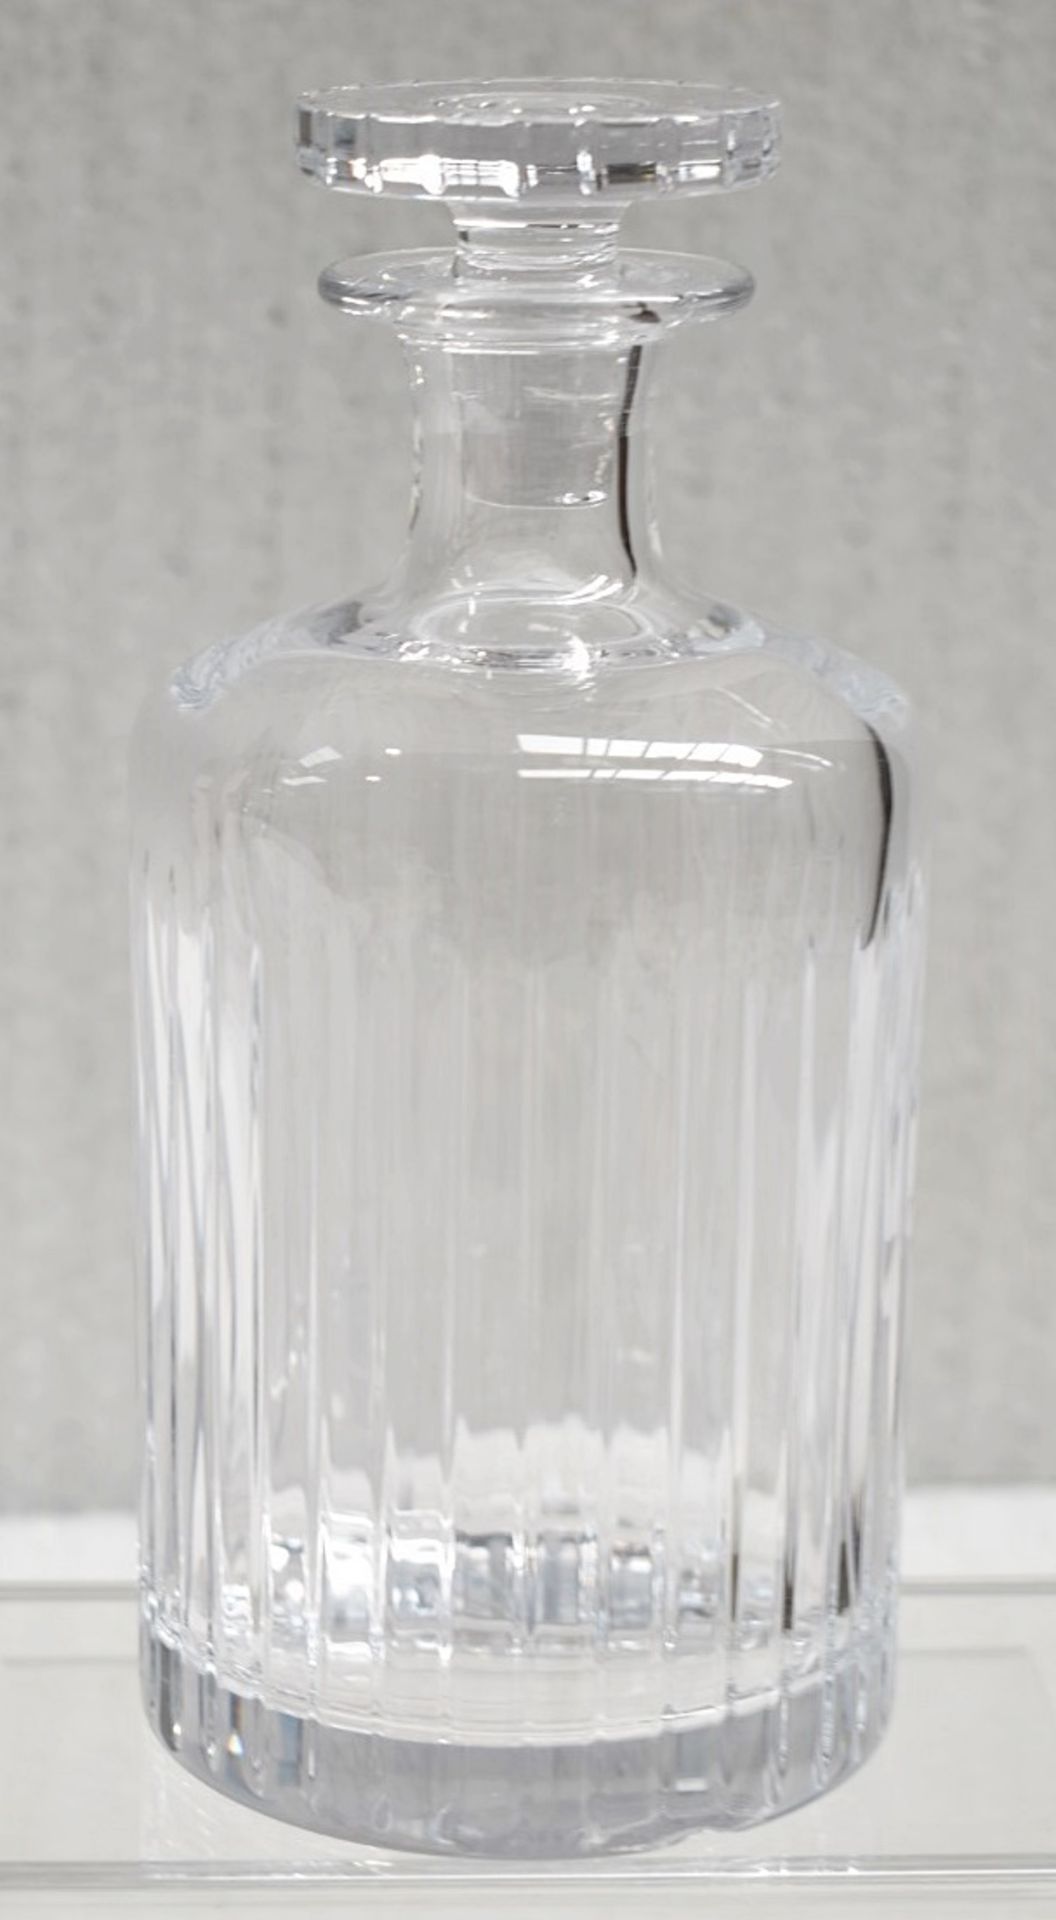 1 x SOHO HOUSE 'Roebling' Large Glass Decanter (750ml) - Original Price £135.00 - Unused Boxed Stock - Image 6 of 8